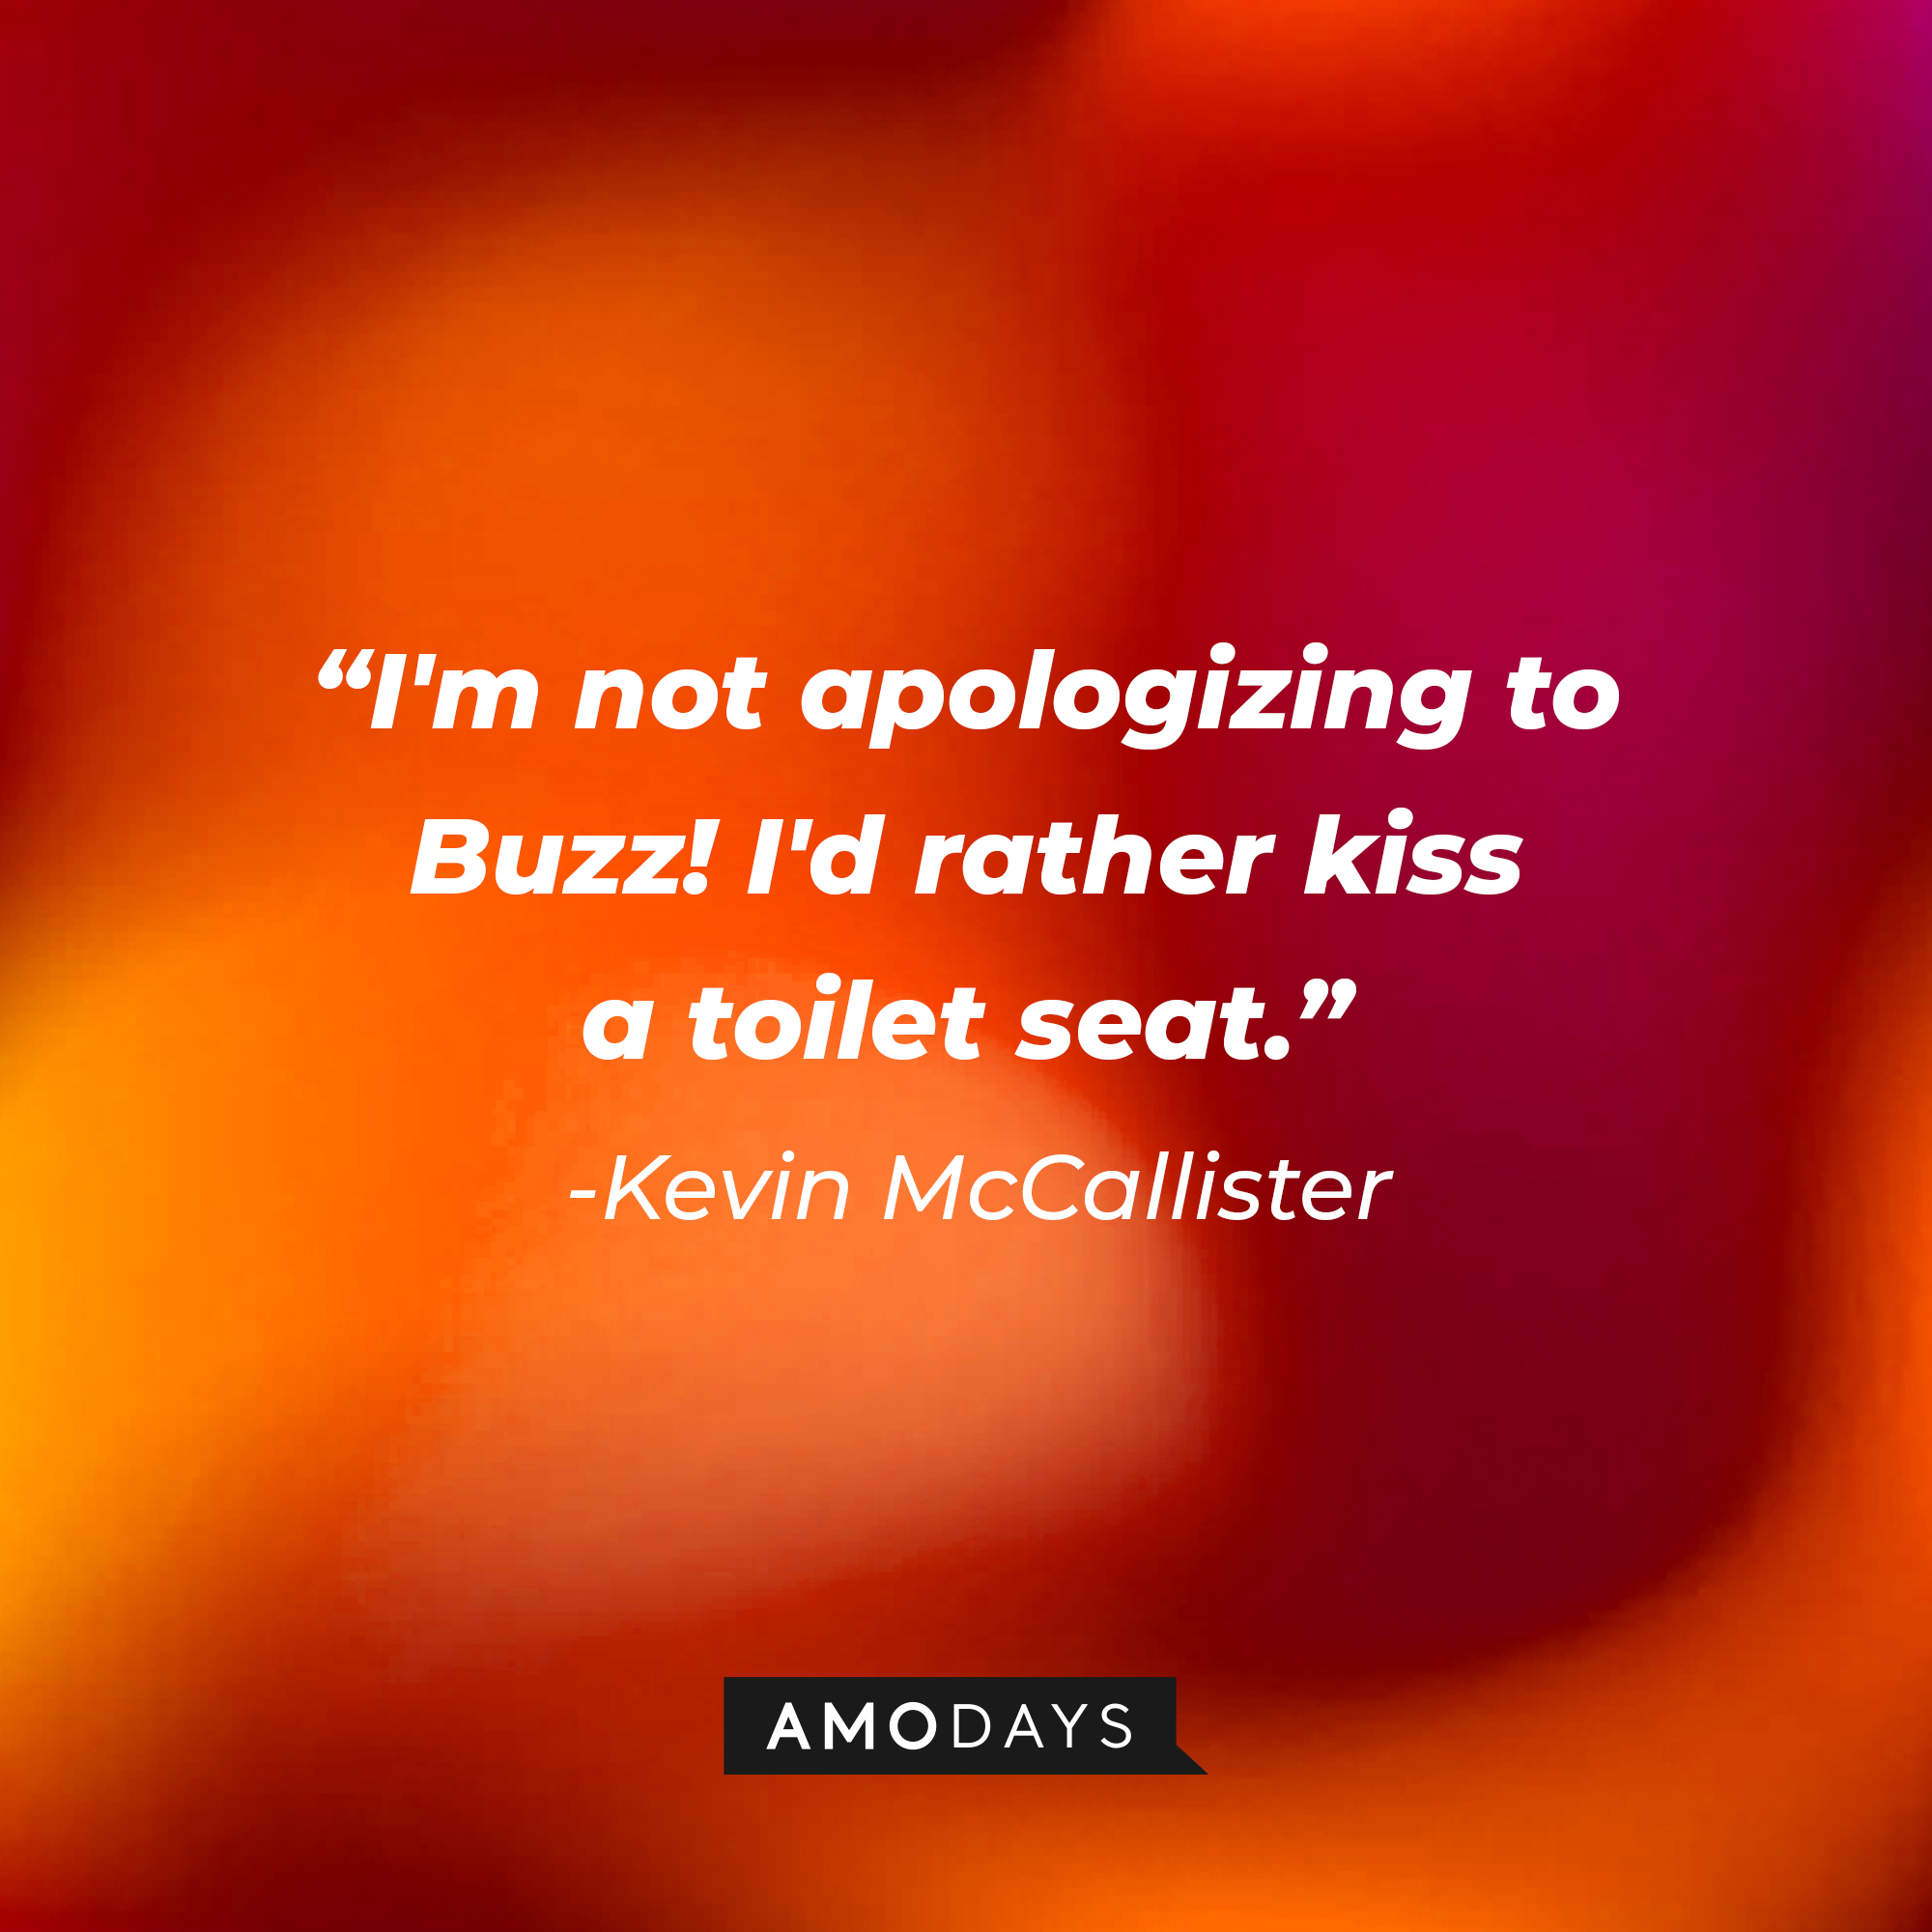 Kevin McCallister's quote: "I'm not apologizing to Buzz! I'd rather kiss a toilet seat." | Source: AmoDays